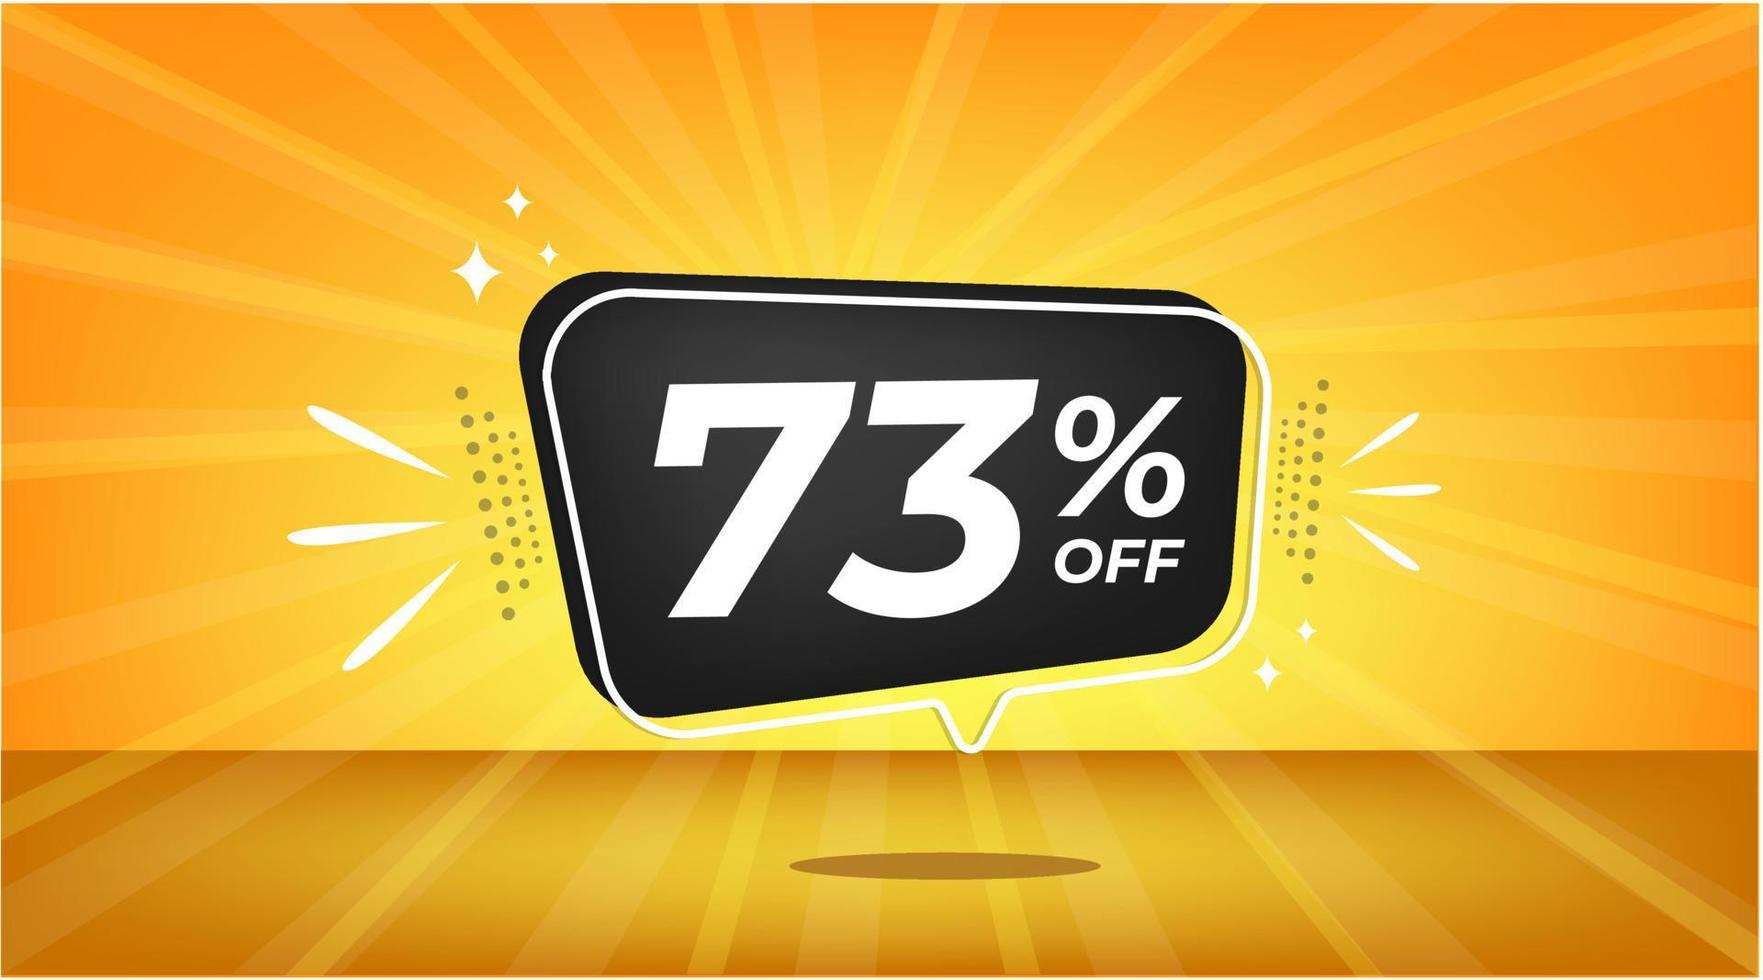 73 percent off. Yellow banner with seventy-three percent discount on a black balloon for mega big sales. vector